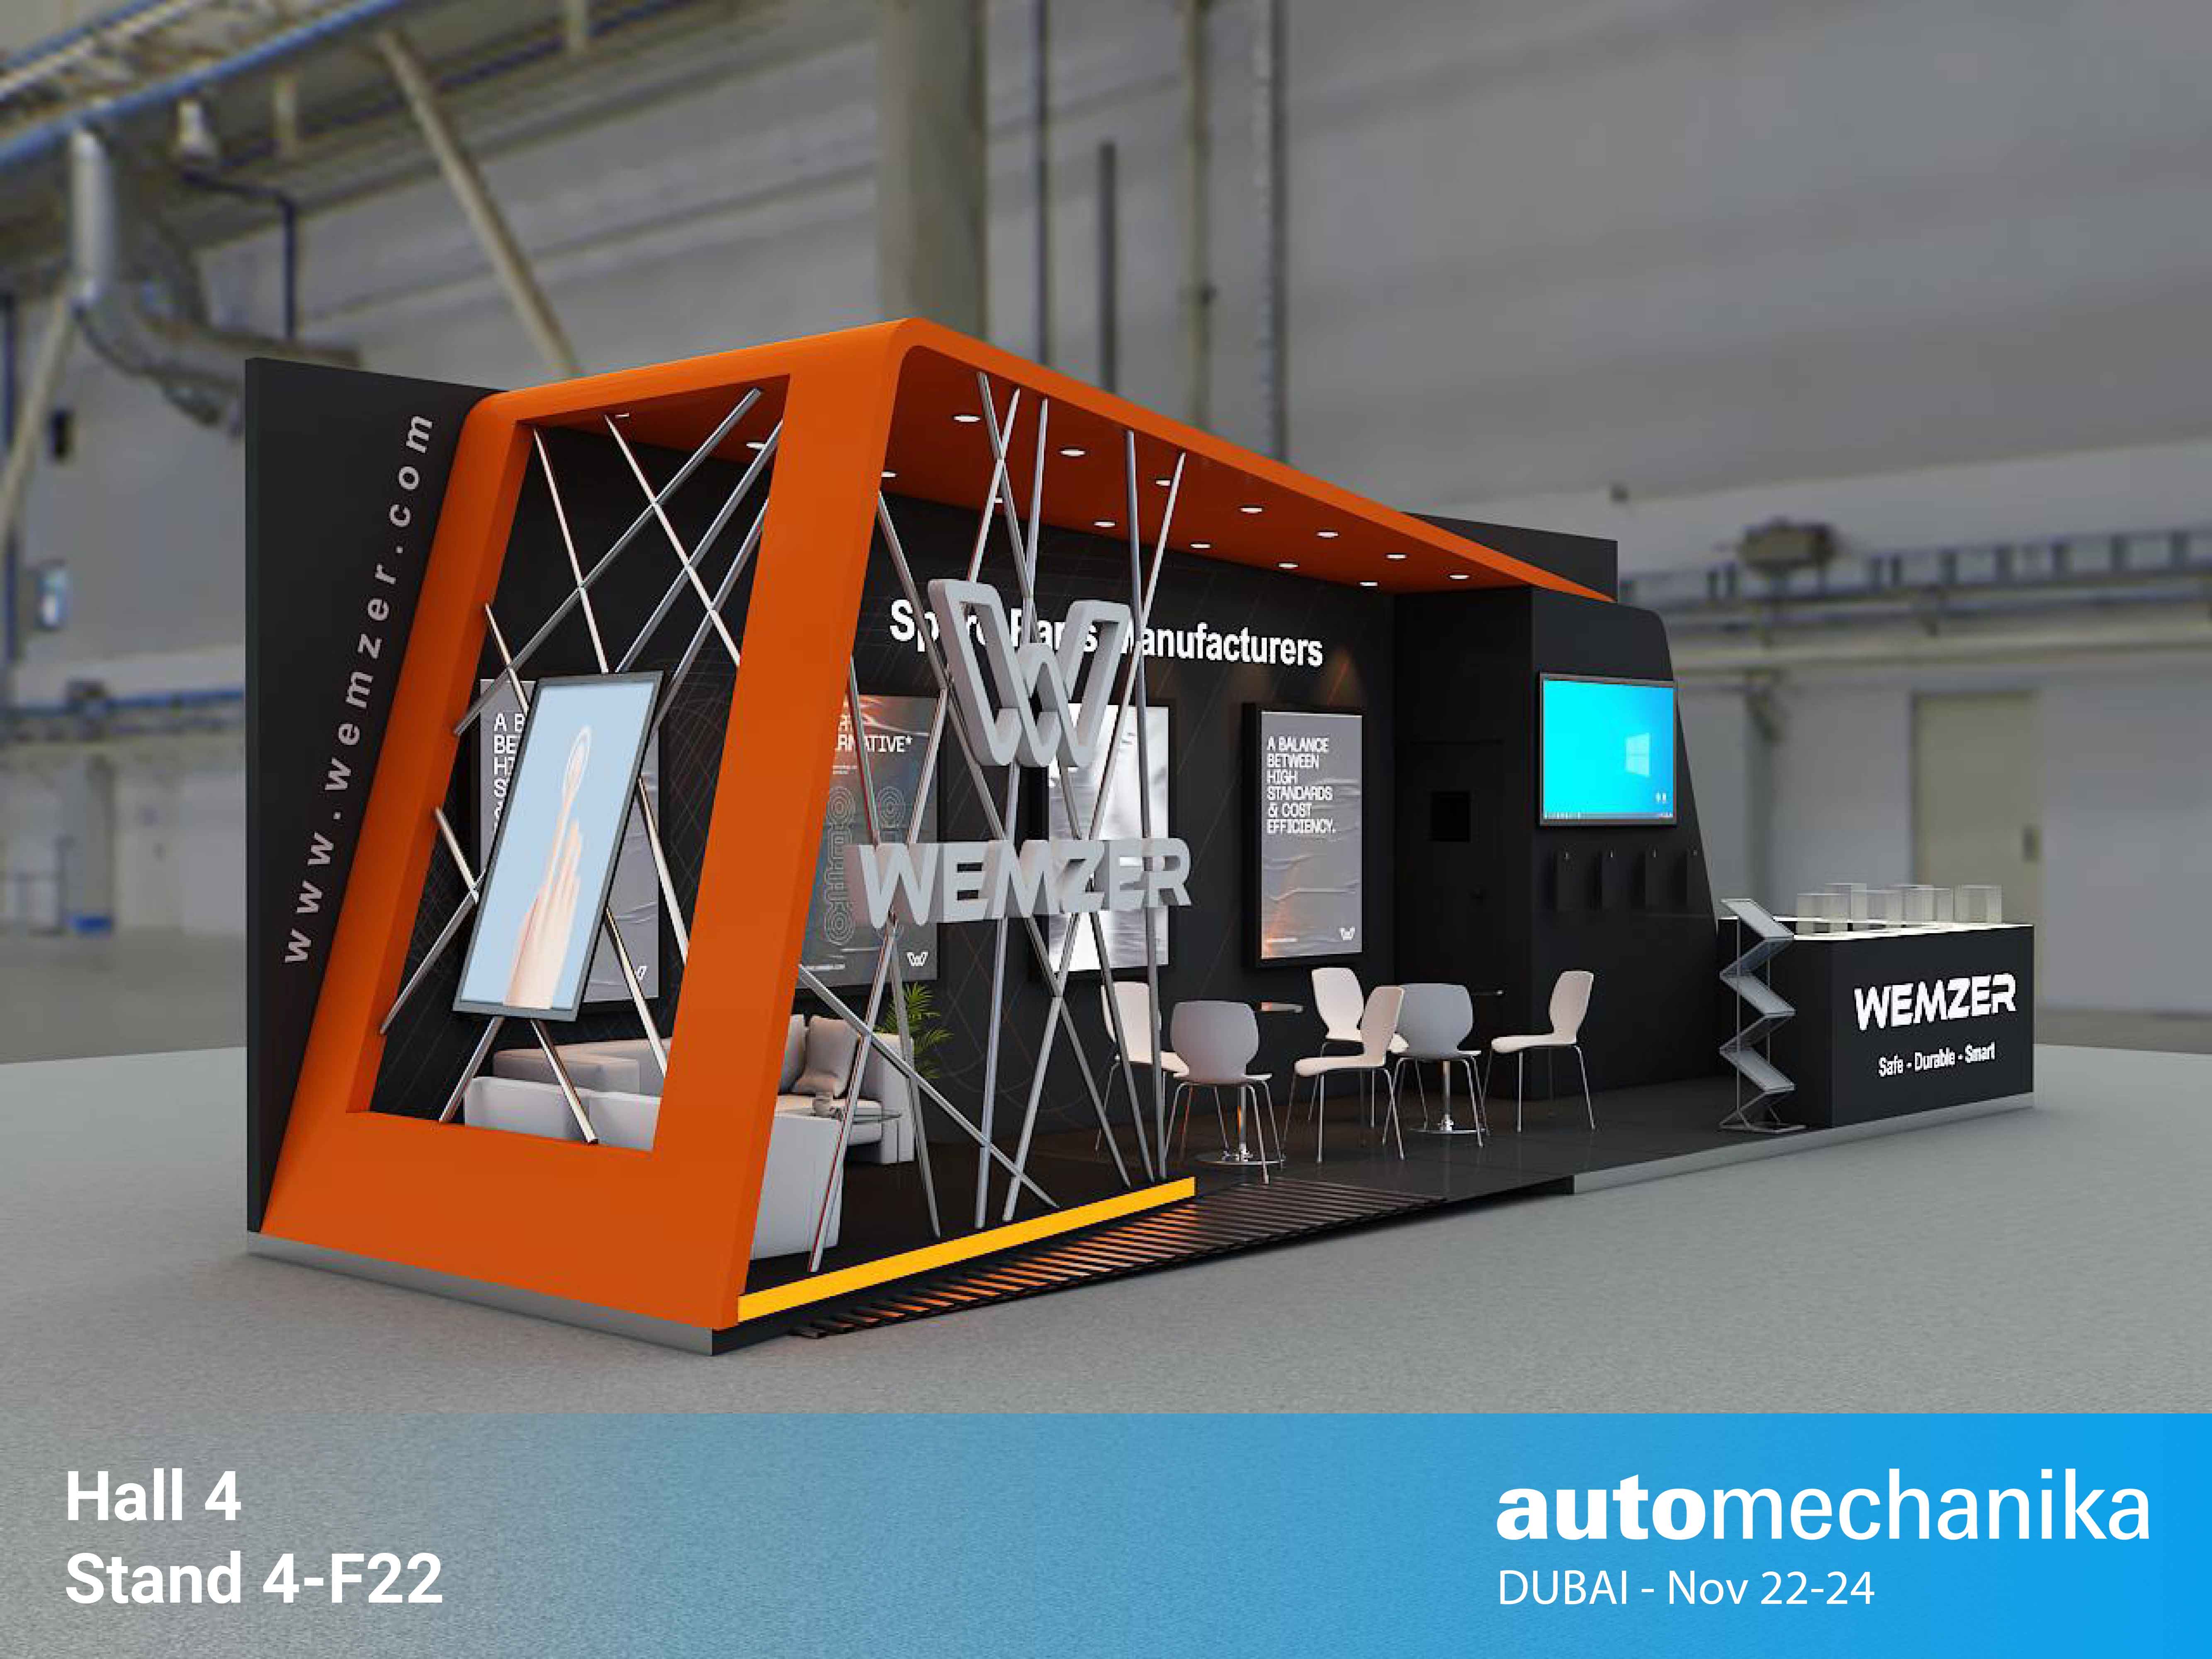 WEMZER TAKES PART IN AUTOMECHANIKA DUBAI FOR THE SECOND YEAR IN A ROW IN 2022